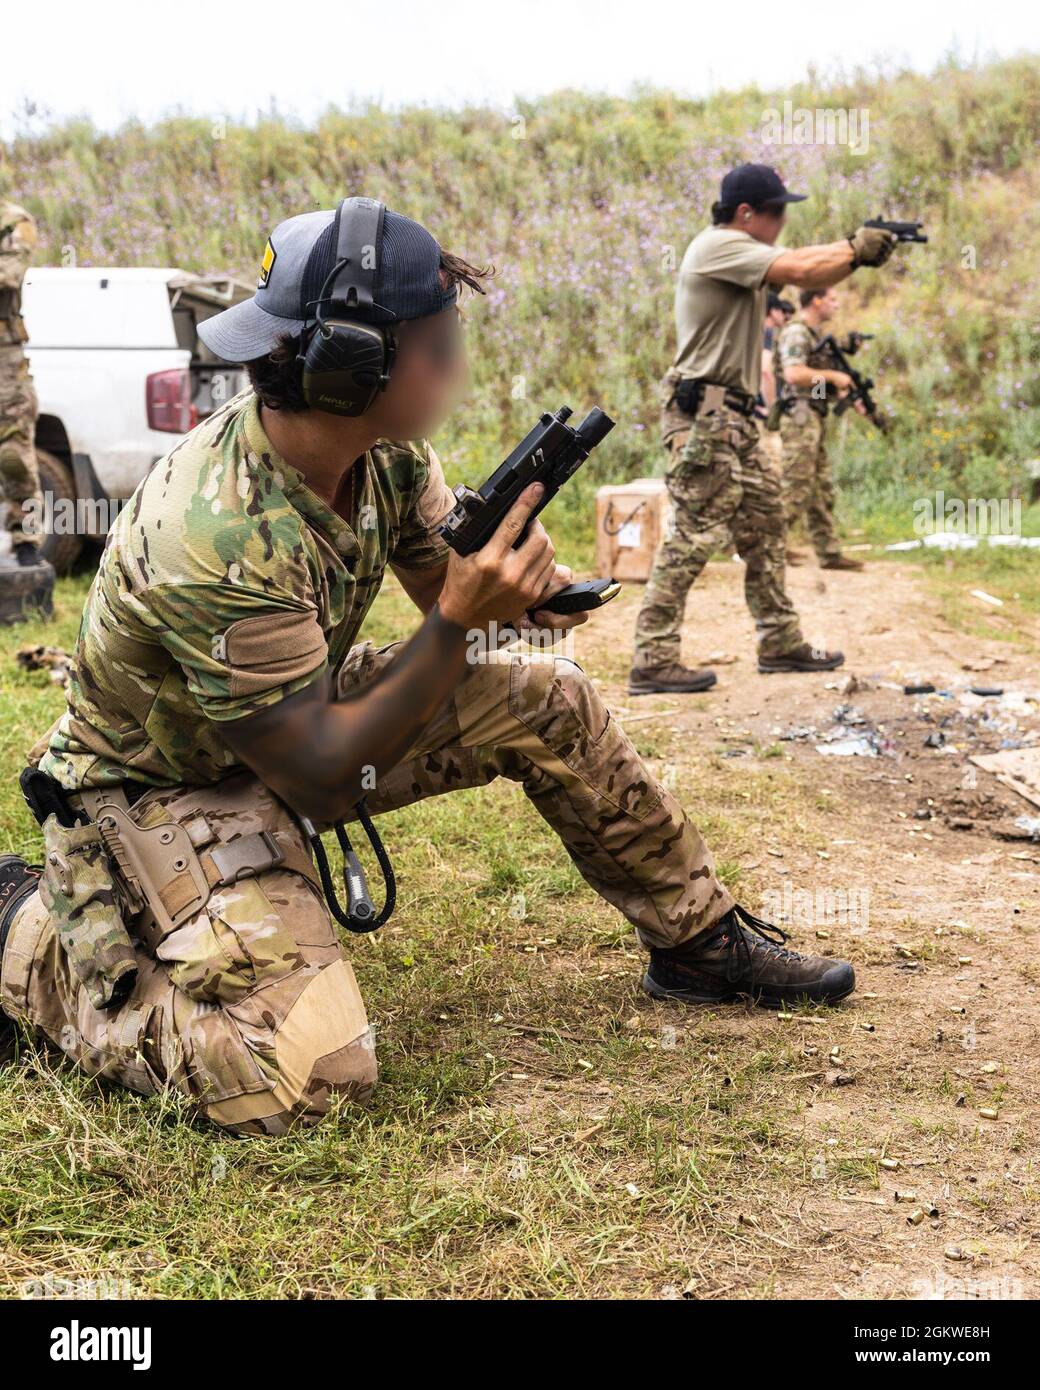 A U.S. Navy SEAL reloads a custom Glock 17 pistol at a range during exercise Sea Breeze 21 in Ochakiv, Ukraine, July 8, 2021. Sea Breeze 21 is a U.S. and Ukraine co-hosted multinational maritime exercise held in the Black Sea designed to enhance interoperability of participating nations and strengthen maritime security within the region. Stock Photo